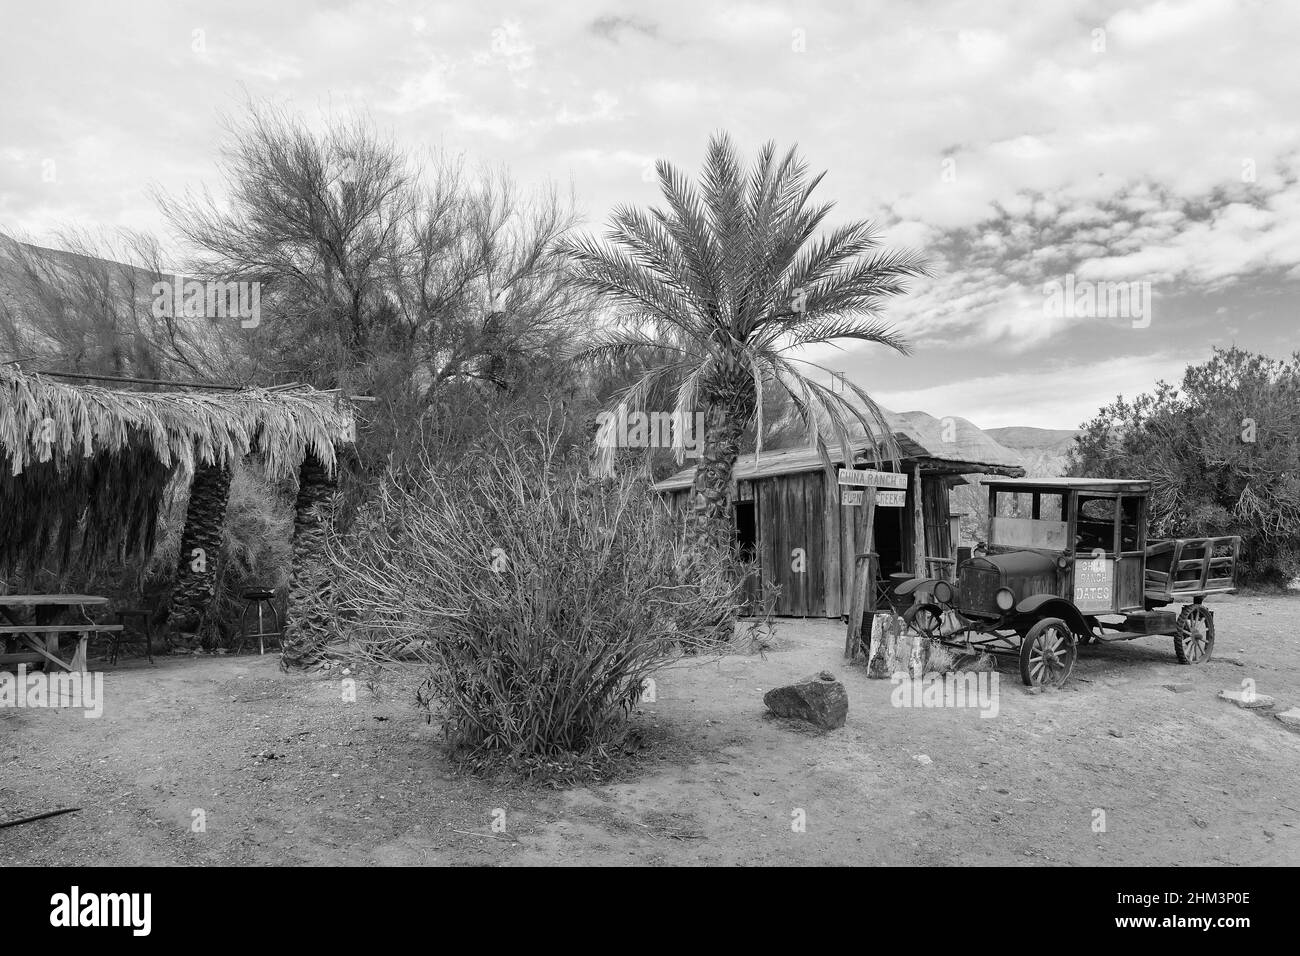 Old delivery truck, barn and date palm at China Ranch Date Farm, Tecopa, California. Black and white photo. Stock Photo